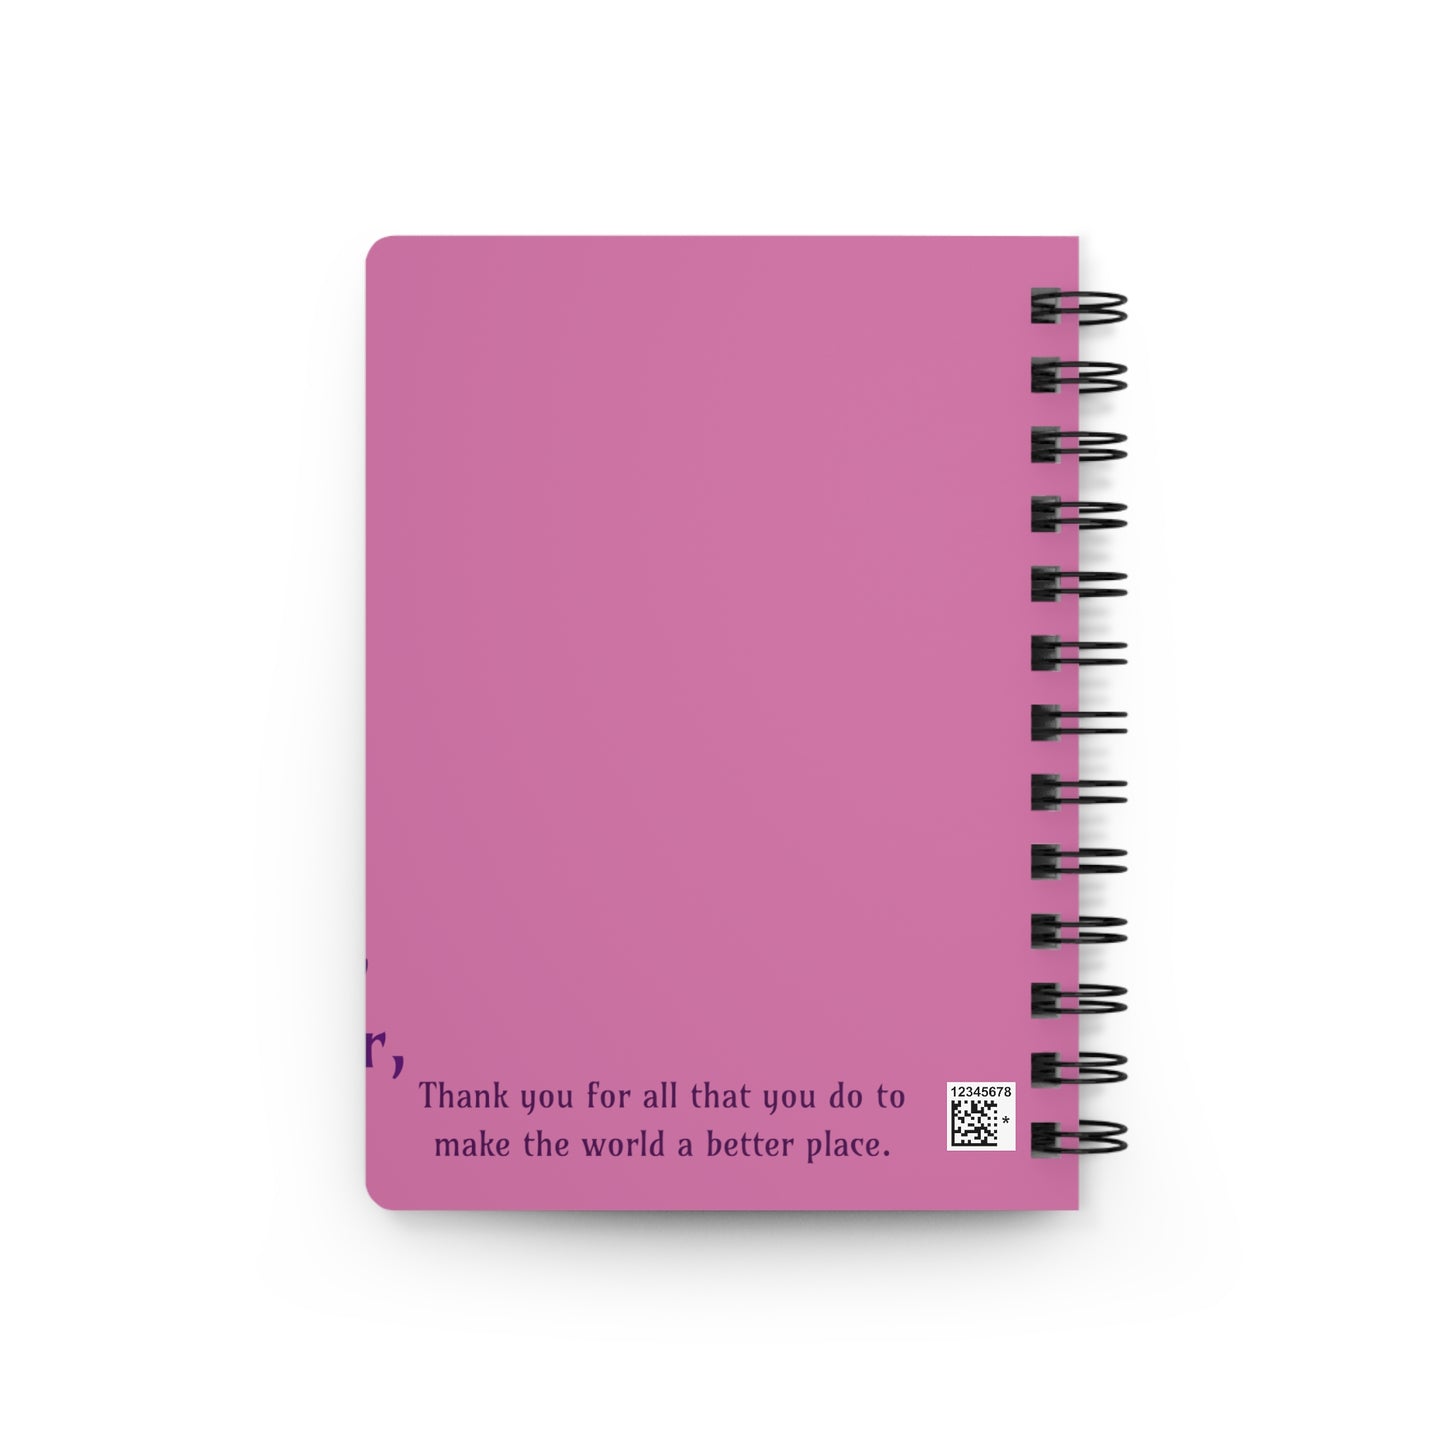 Pink Spiral Bound Journal with Inspirational Quote from Malala Yousafzai